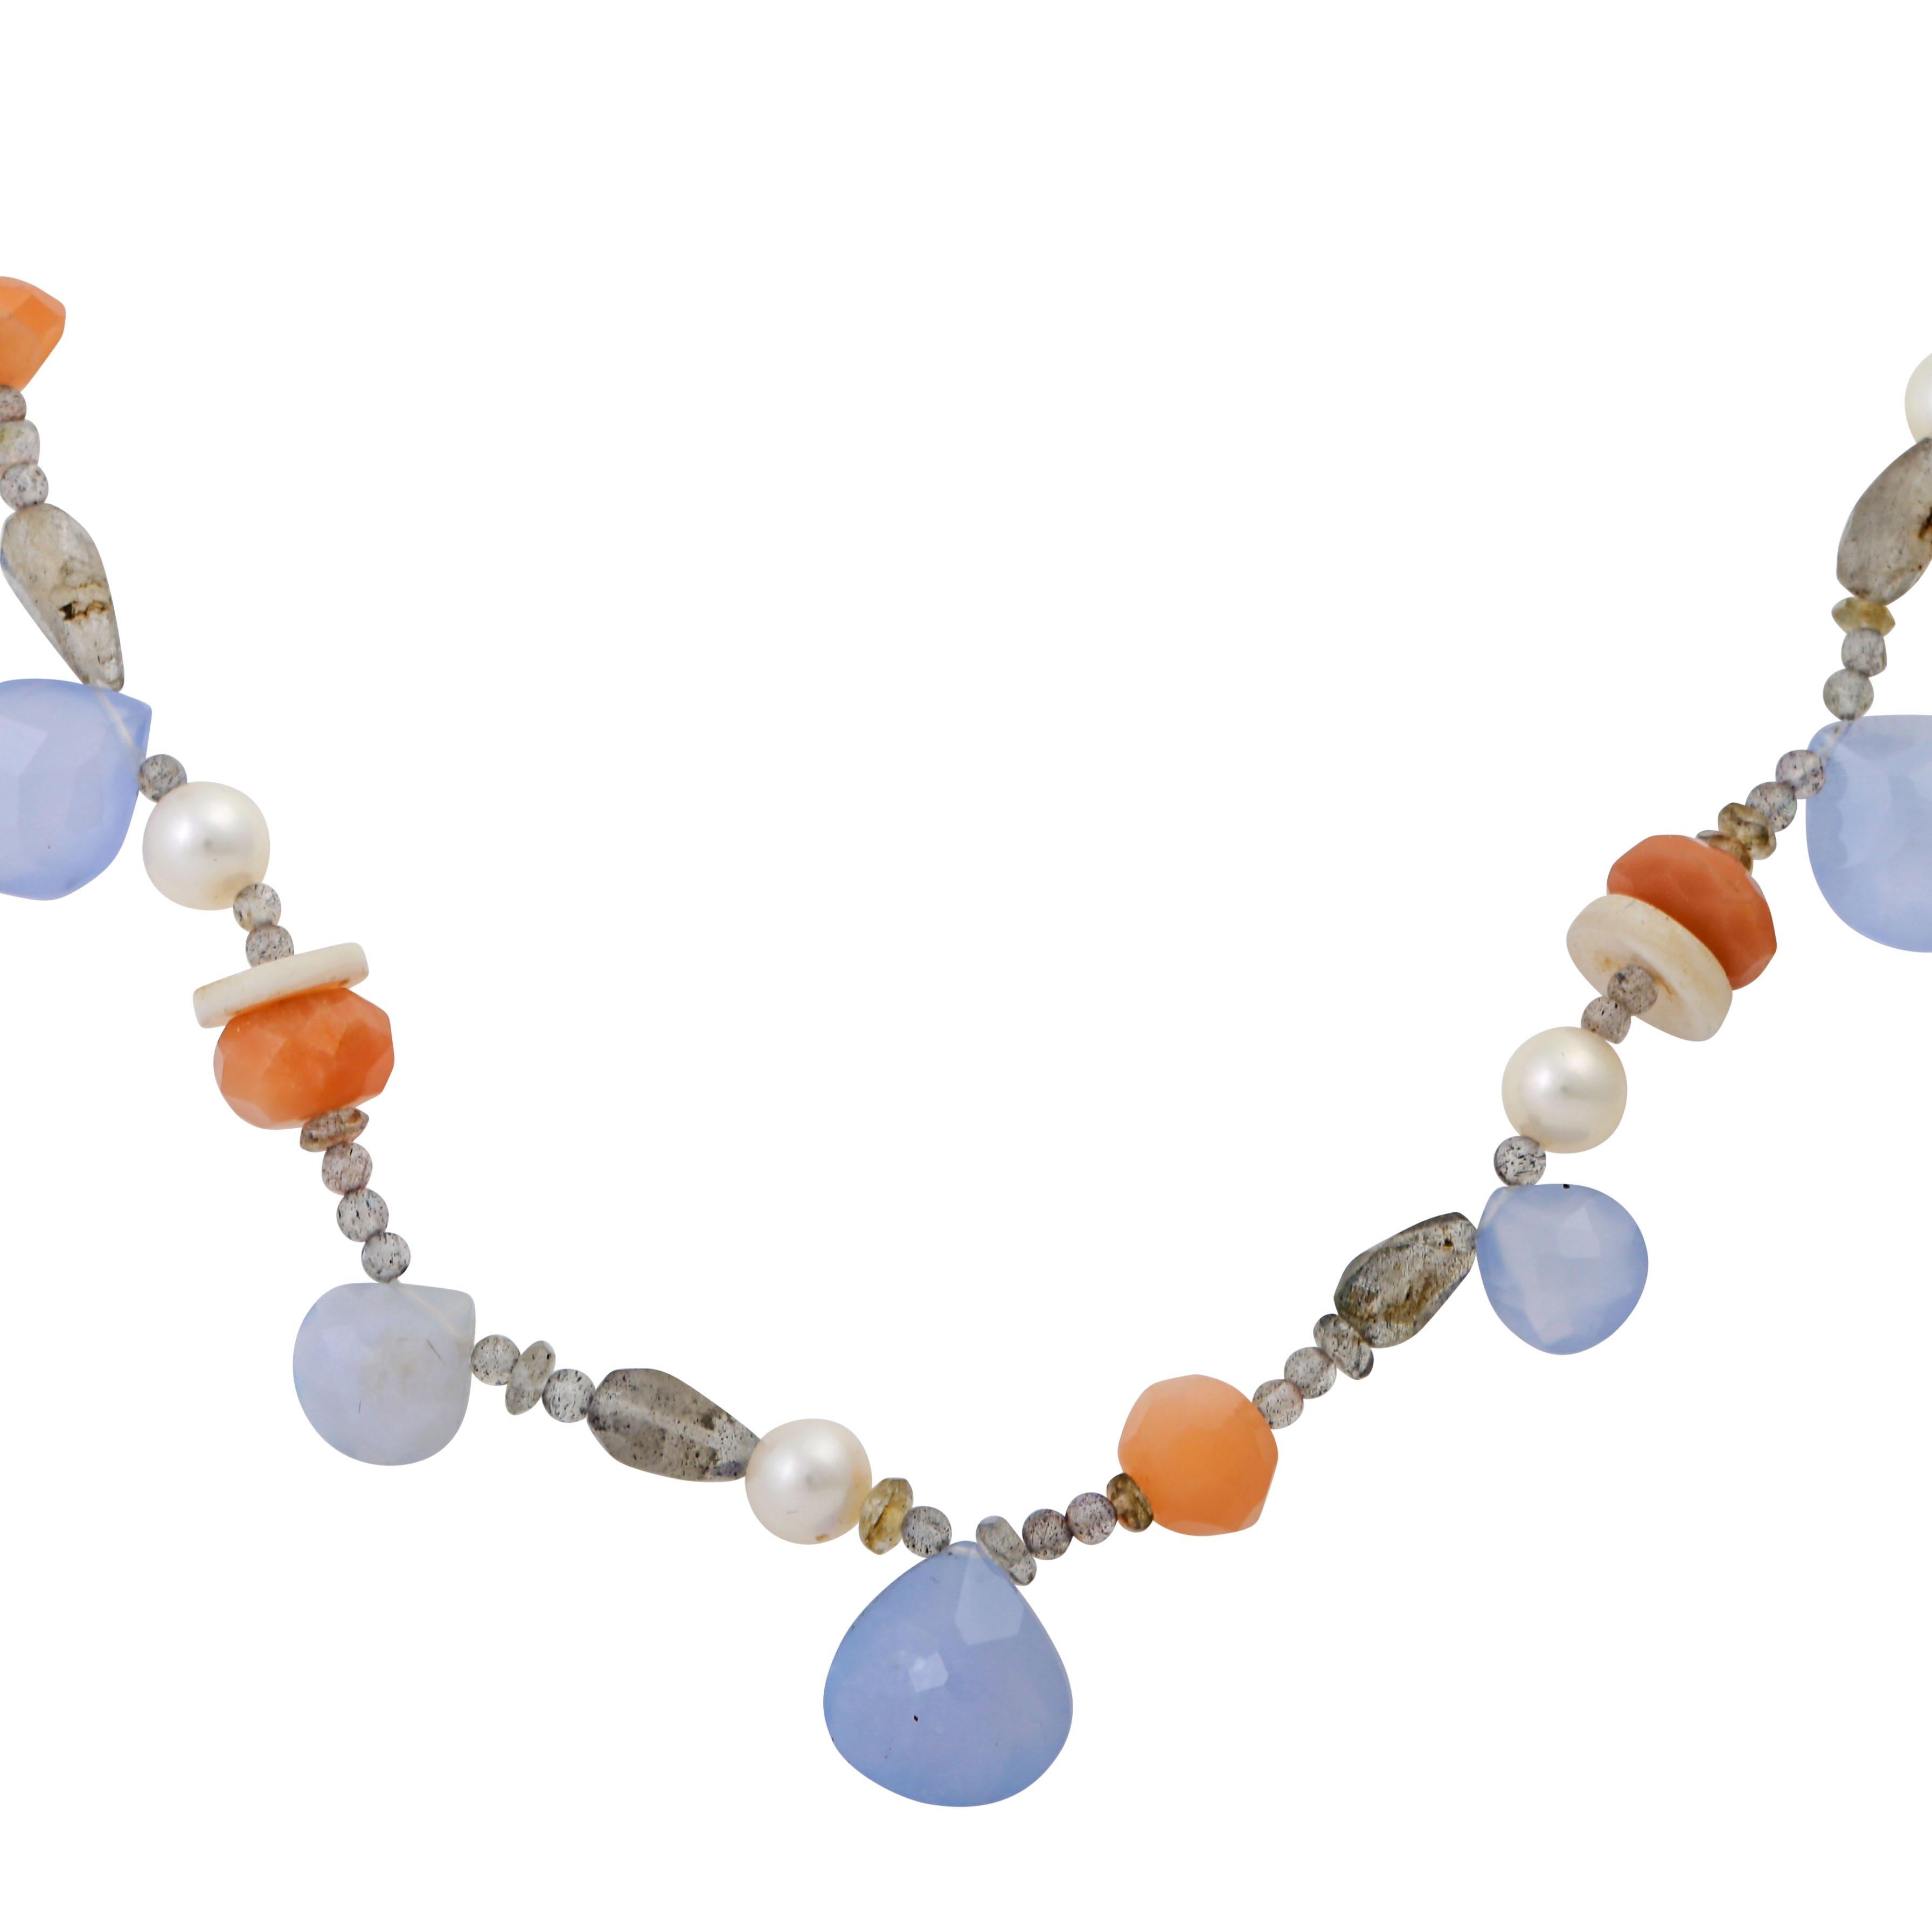 Necklace with precious stones, e.g. Drop-shaped chalcedony, labradorite, moonstone, silver clasp with marcasite, l: 53 cm, 20th century, signs of wear.



Necklace with labradorites, moonstones and chalcedon, clasp silver. L: approx. 53 cm, 20th